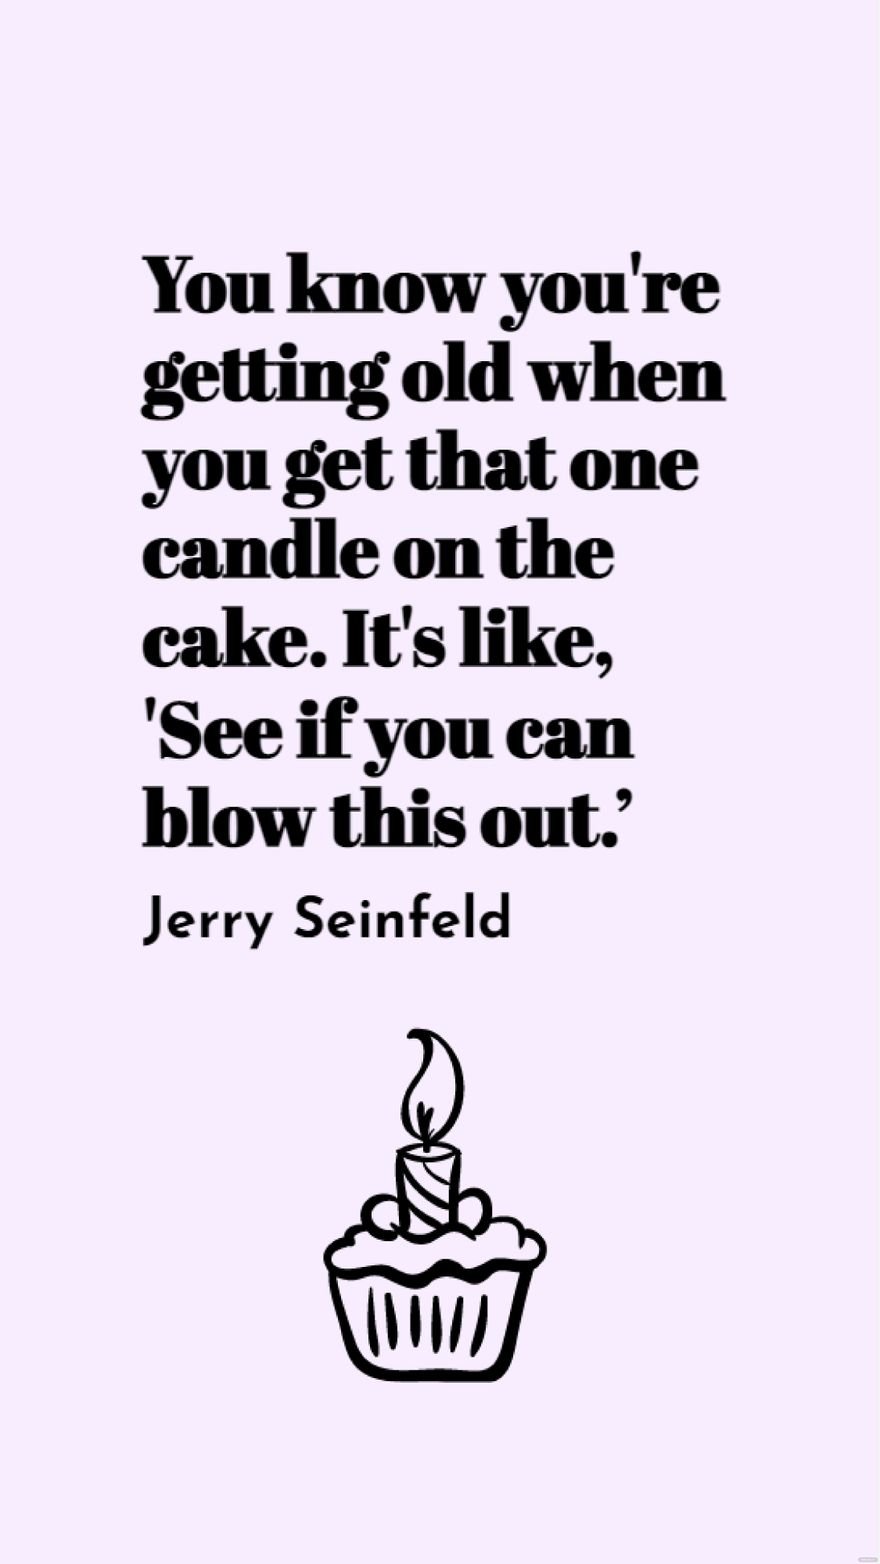 Jerry Seinfeld - You know you're getting old when you get that one candle on the cake. It's like, 'See if you can blow this out.’